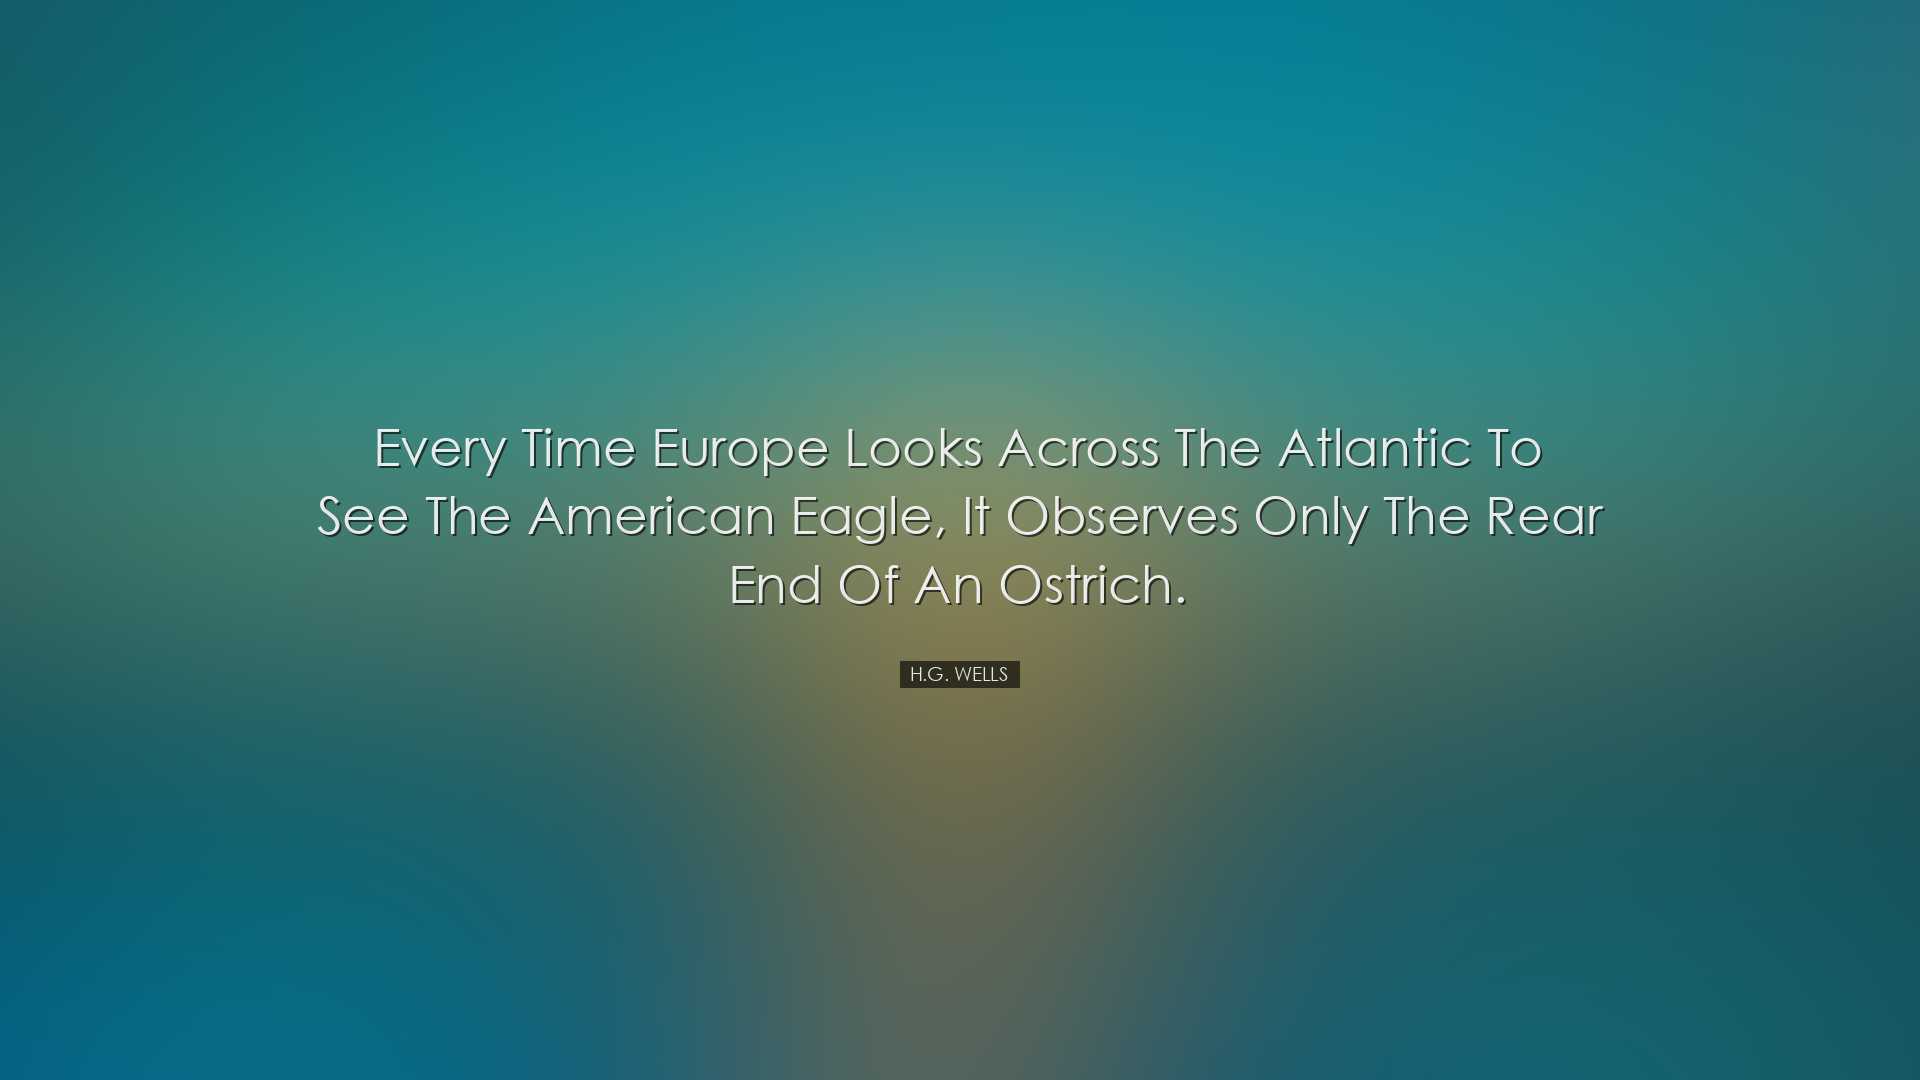 Every time Europe looks across the Atlantic to see the American Ea